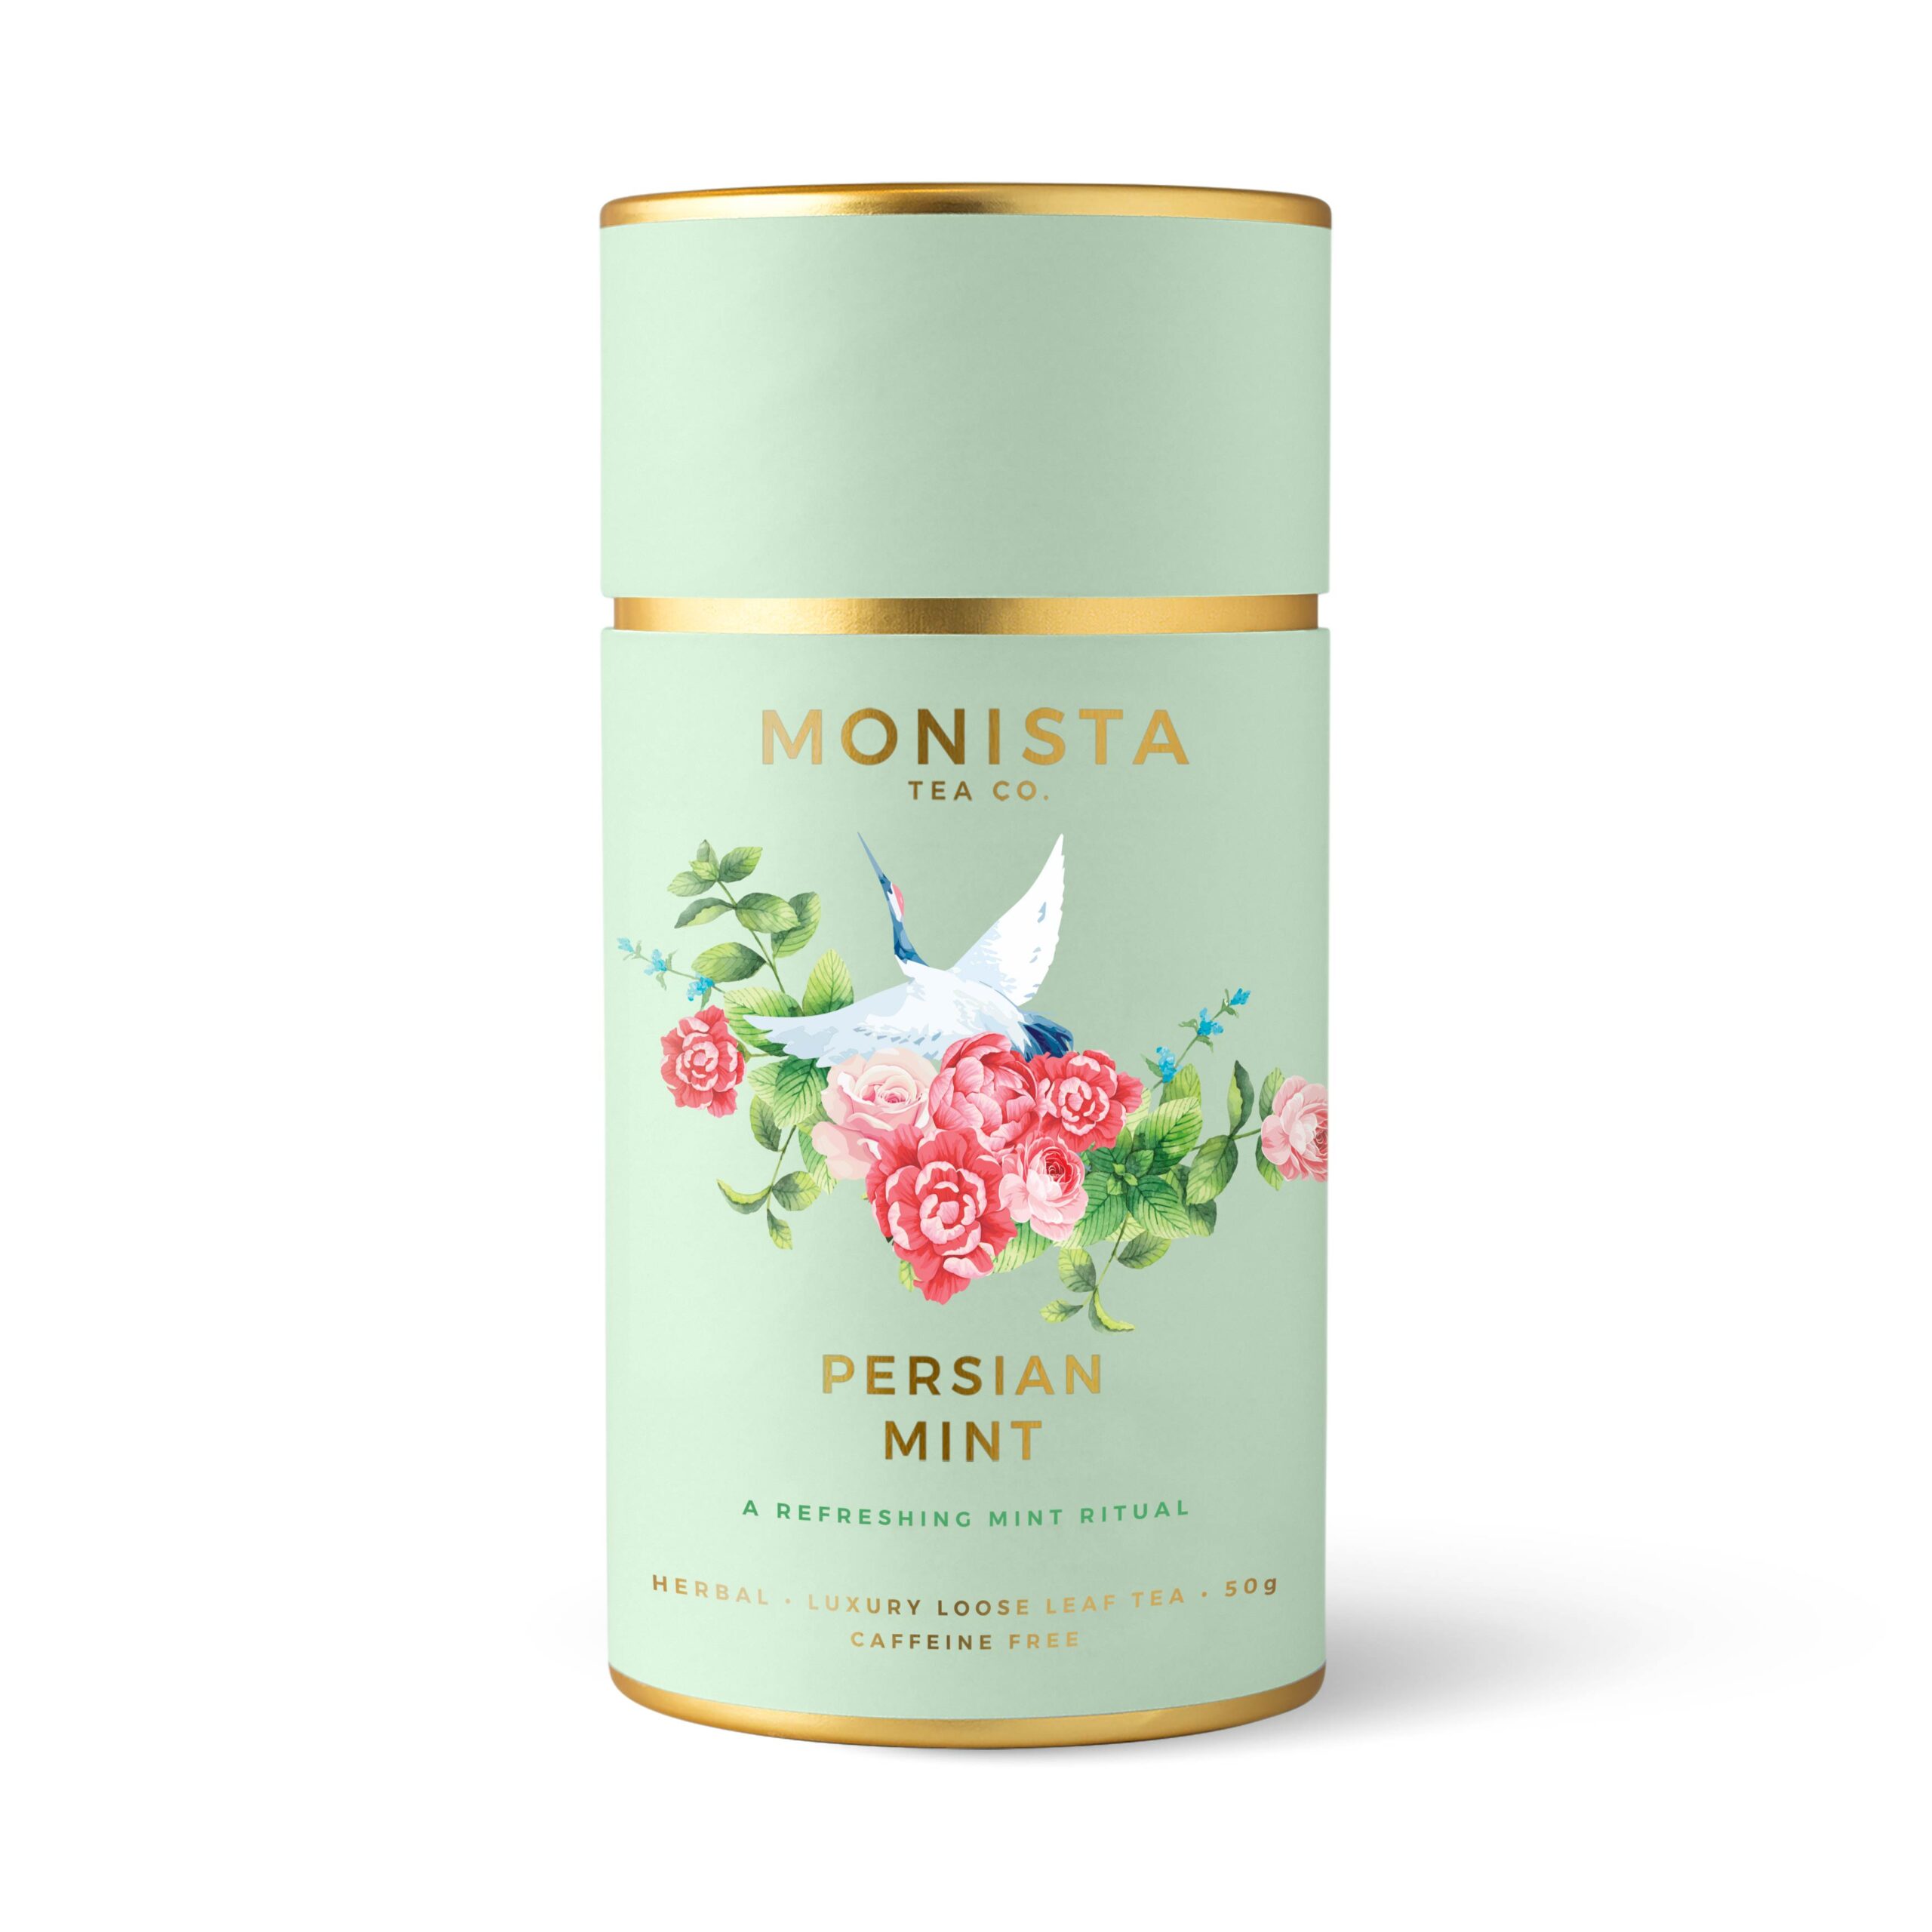 Mint tea canister with bird and flowers